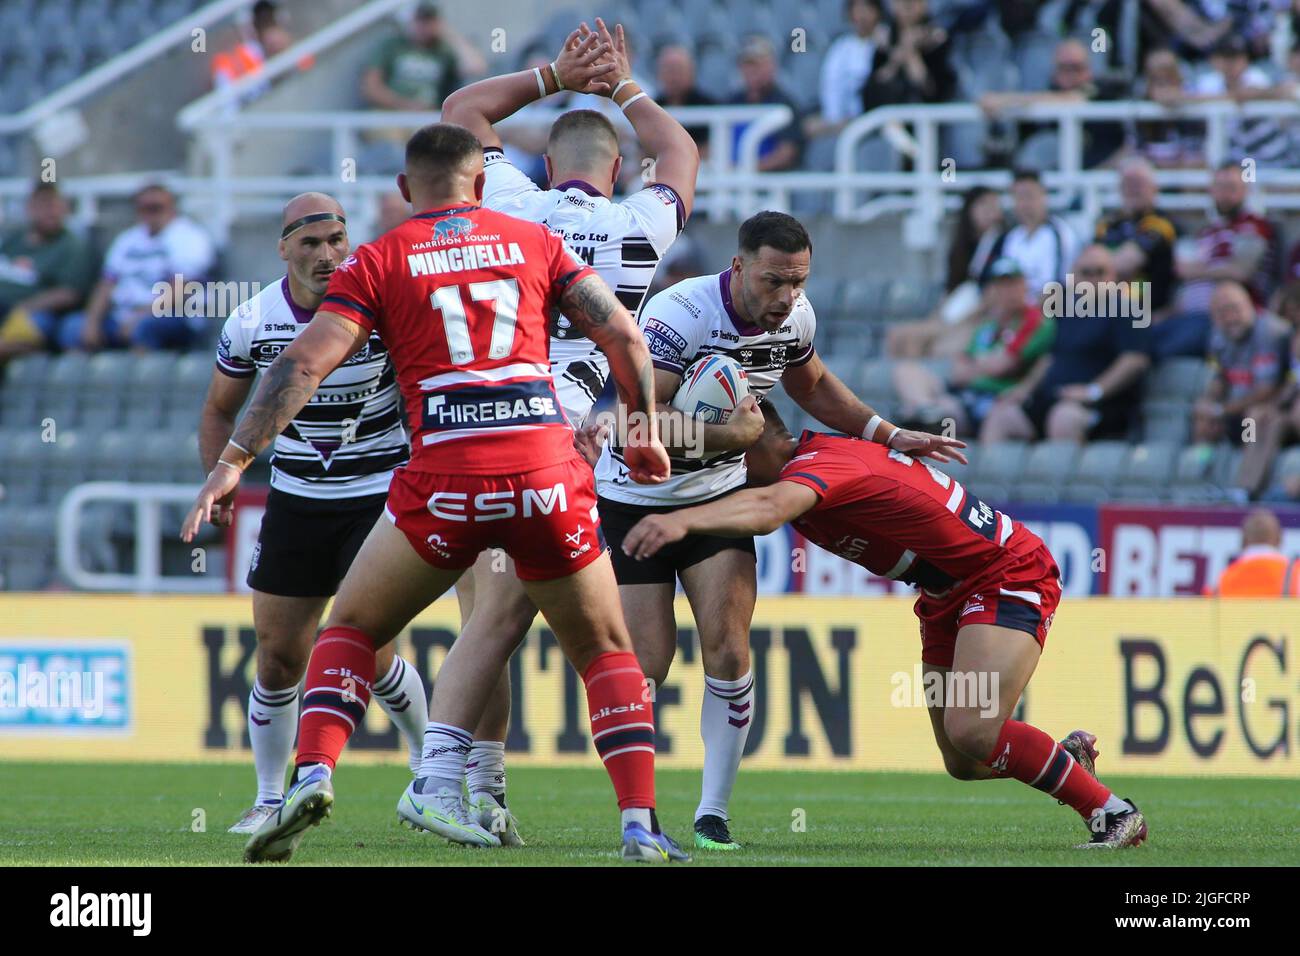 St James Park, Newcastle, Newcastle upon Tyne, Royaume-Uni. 10th juillet 2022. Betfred Super League - week-end magique Hull KR vs Hull FC Luke Gale de Hull FC sur l'attaque contre Hull Kingston Rovers. Crédit : Touchlinepics/Alamy Live News Banque D'Images